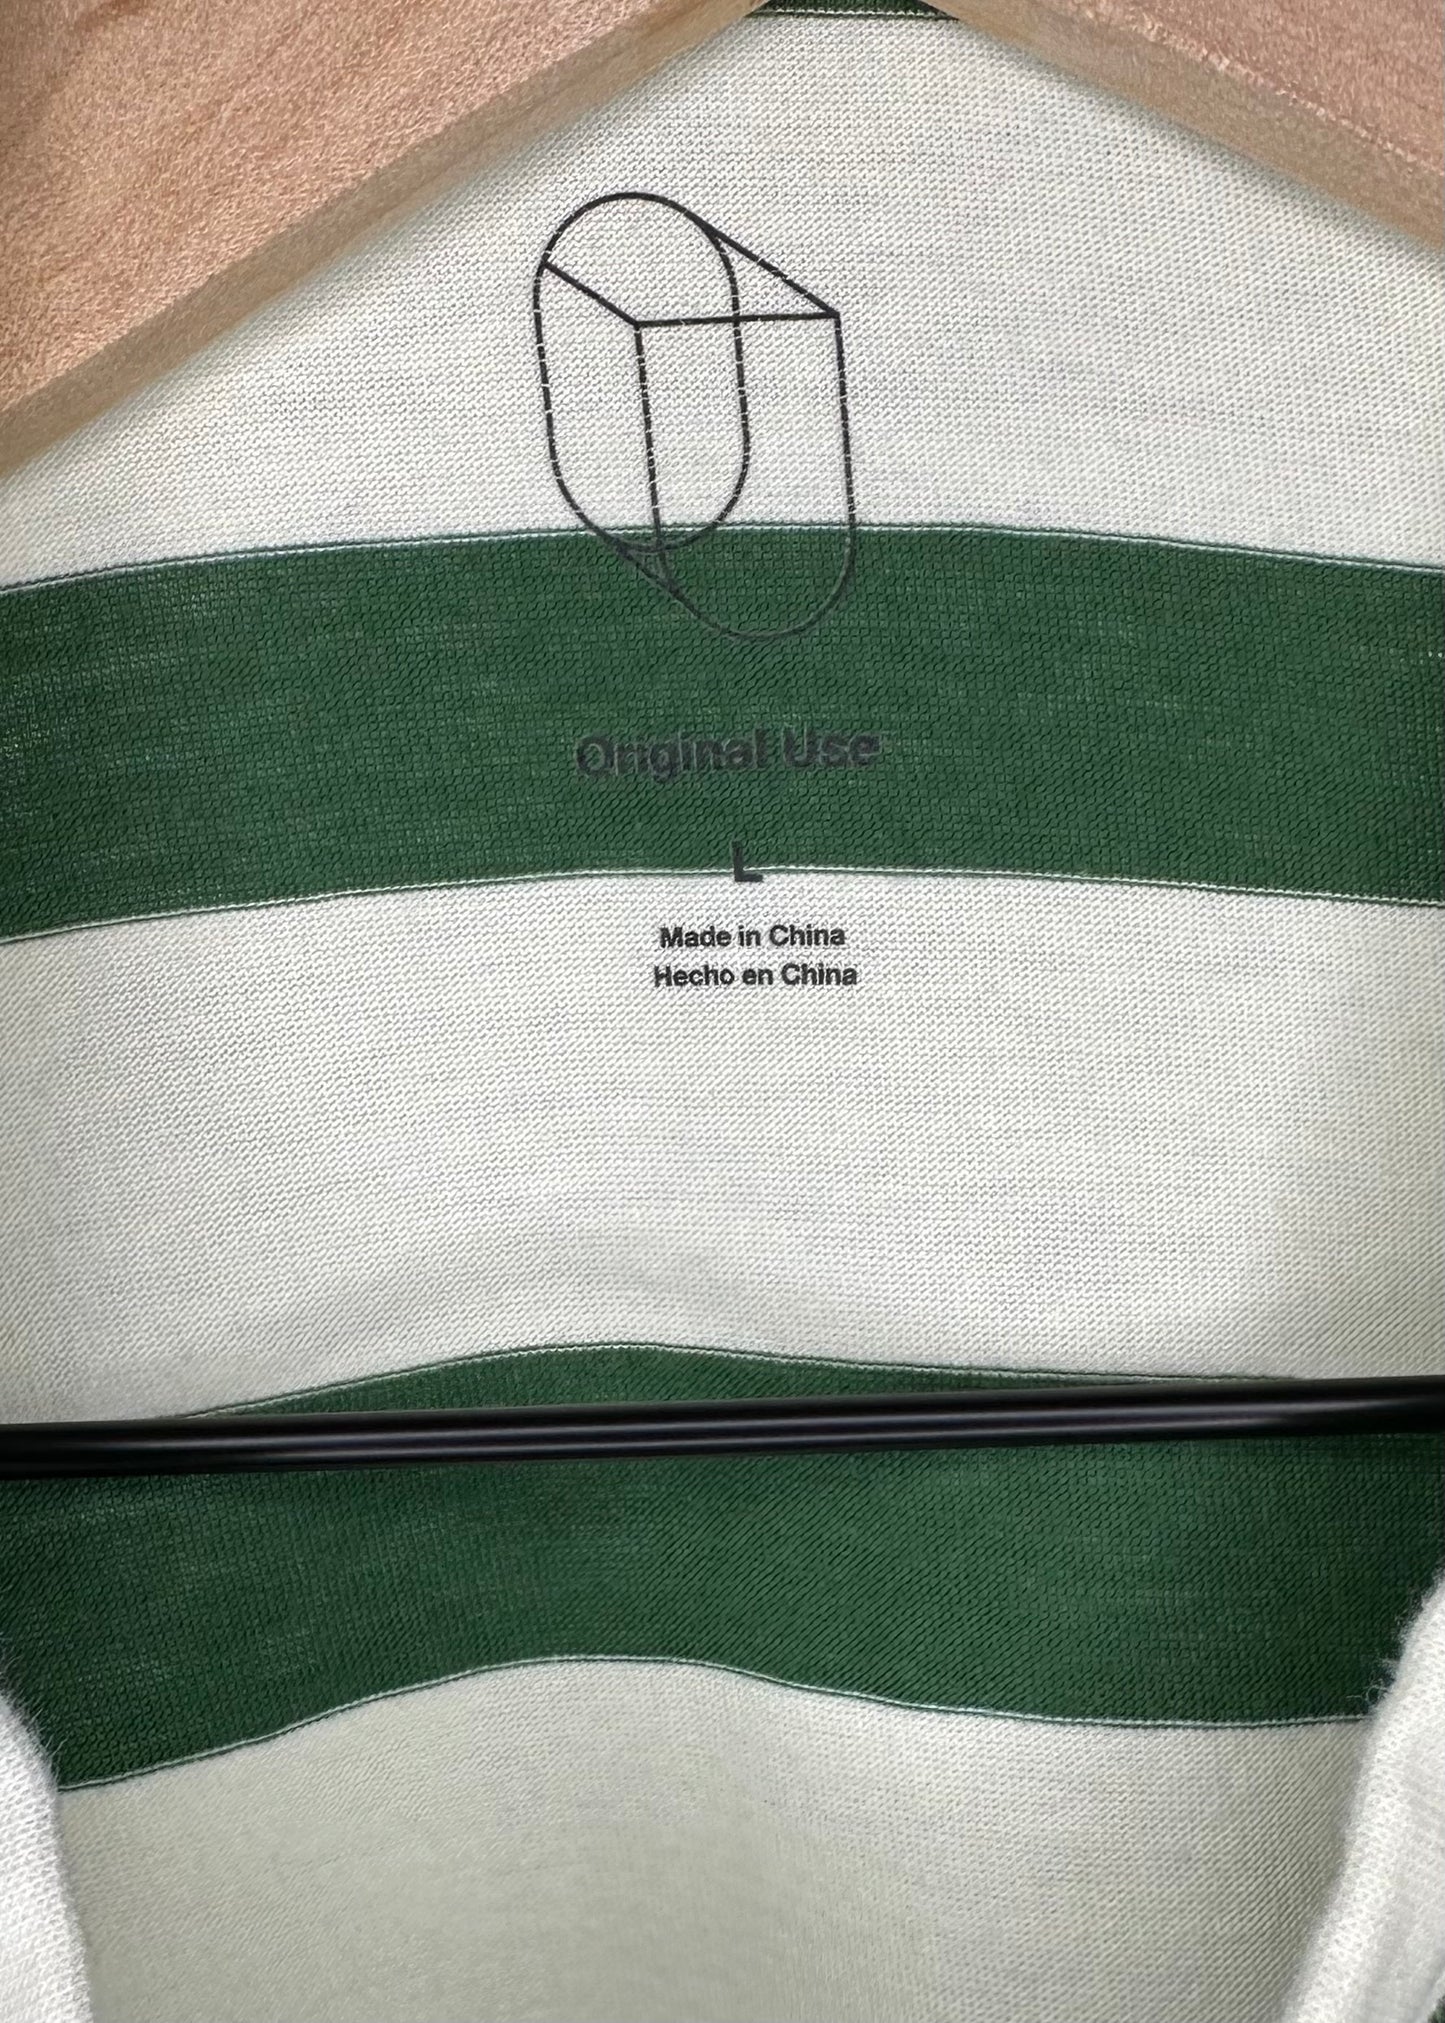 Green and White Stripe Shirt by Original Use